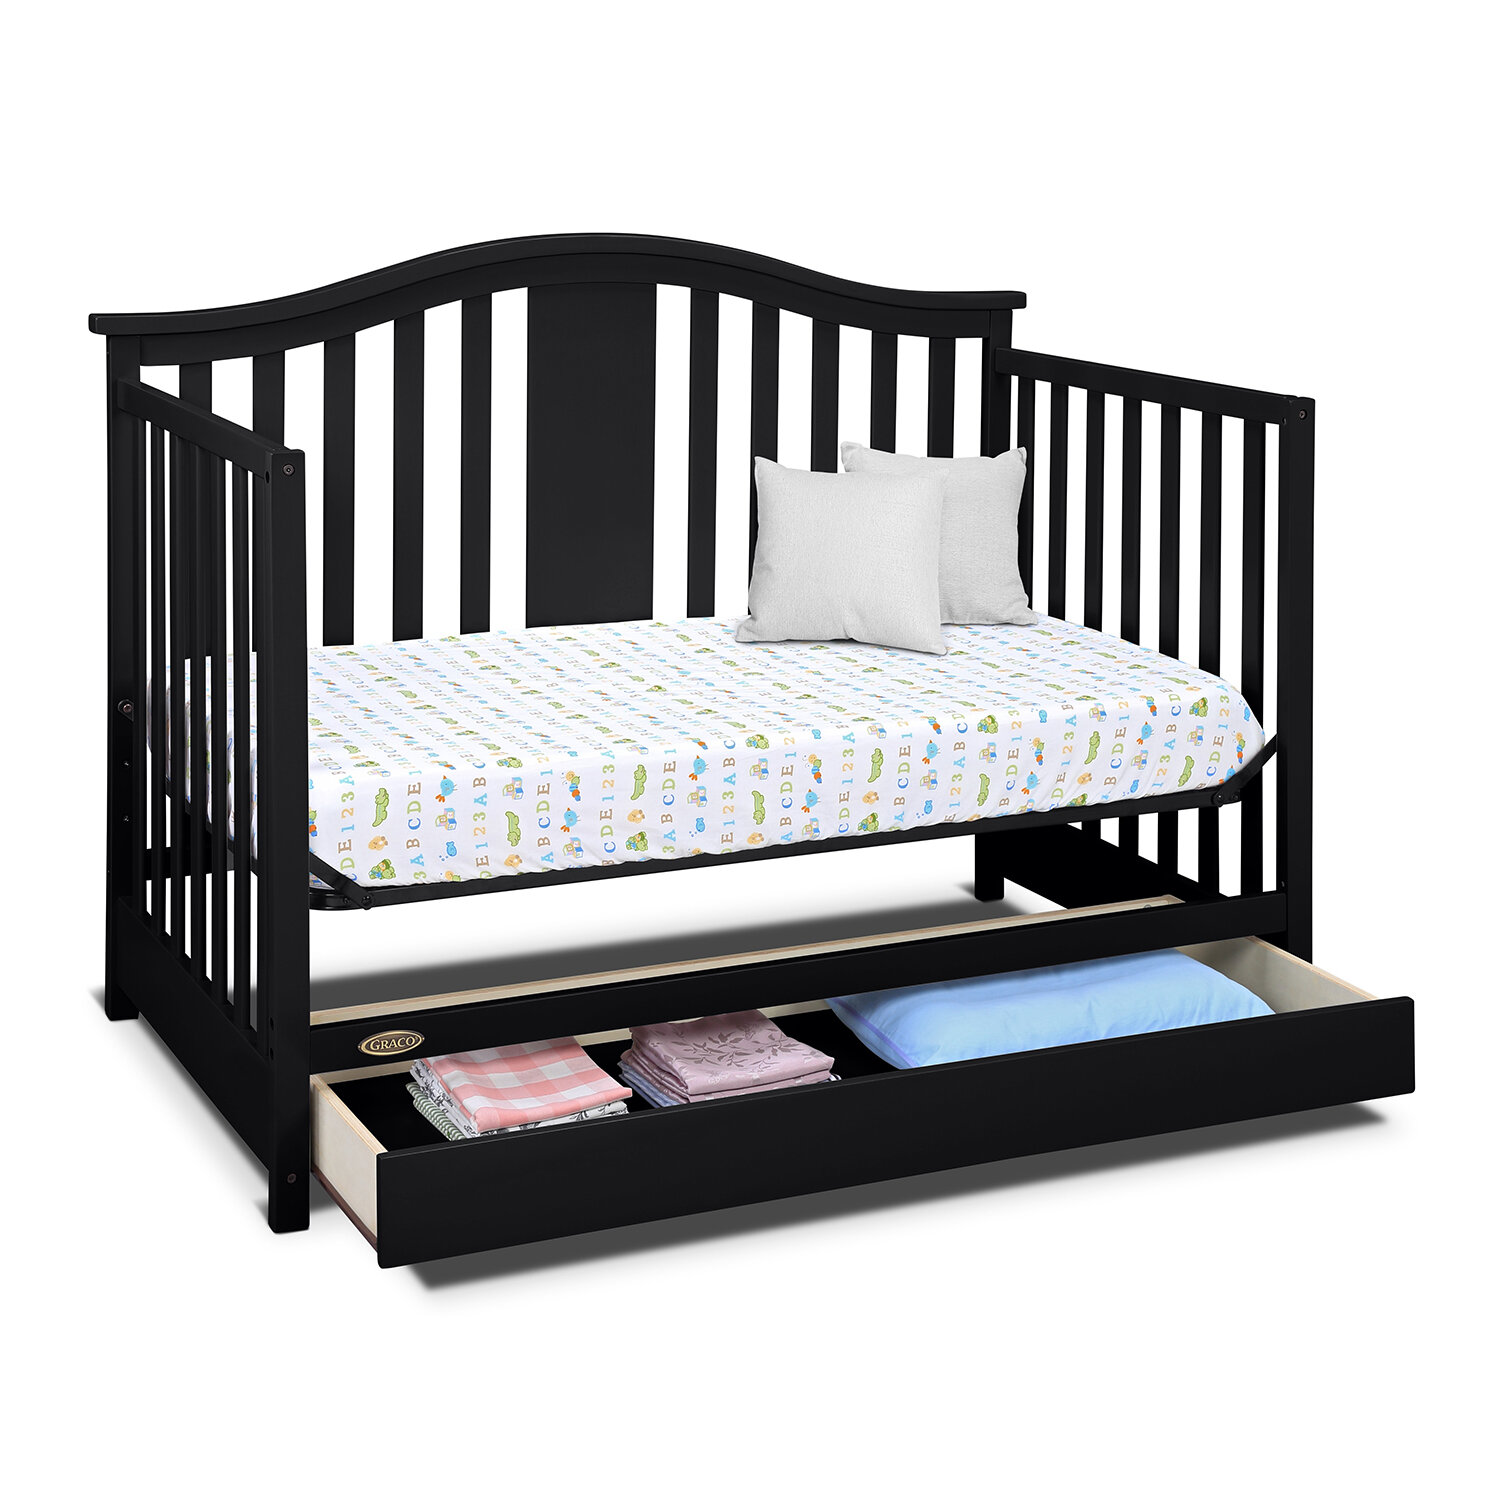 Graco Solano 4-in-1 Convertible Crib with Drawer One Size White